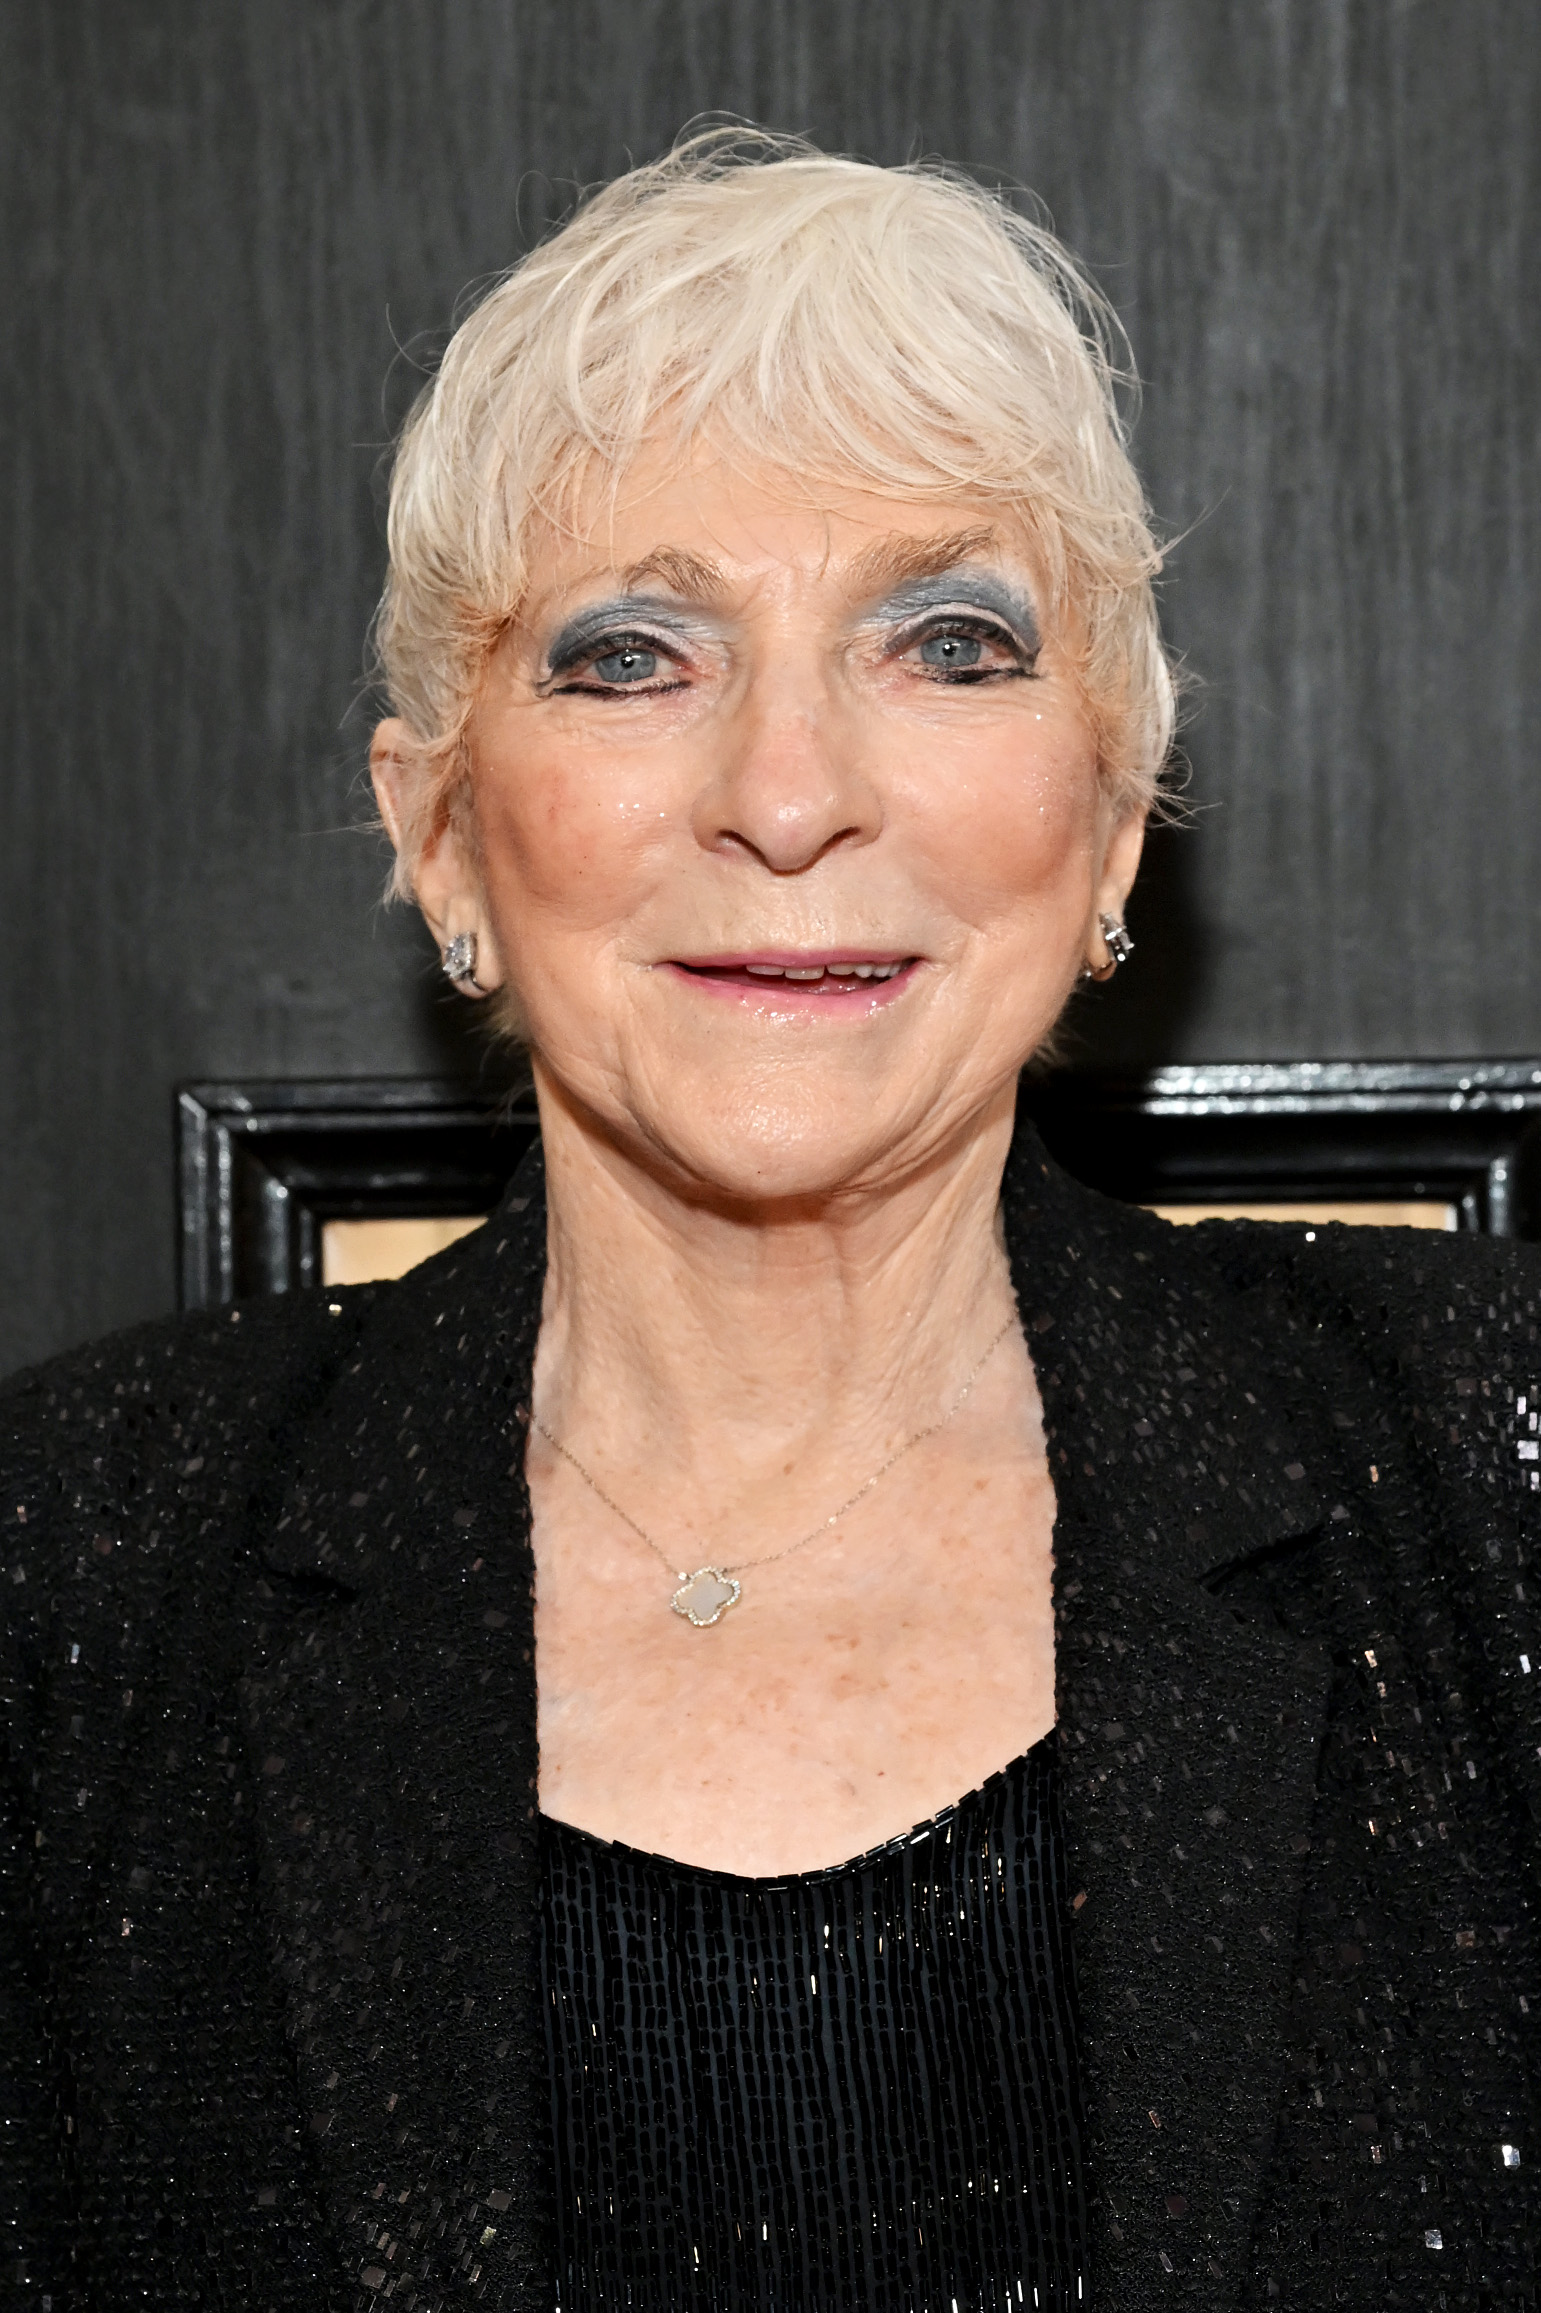 Judy Collins at the 65th Grammy Awards held in Los Angeles, California on February 5, 2023 | Source: Getty Images